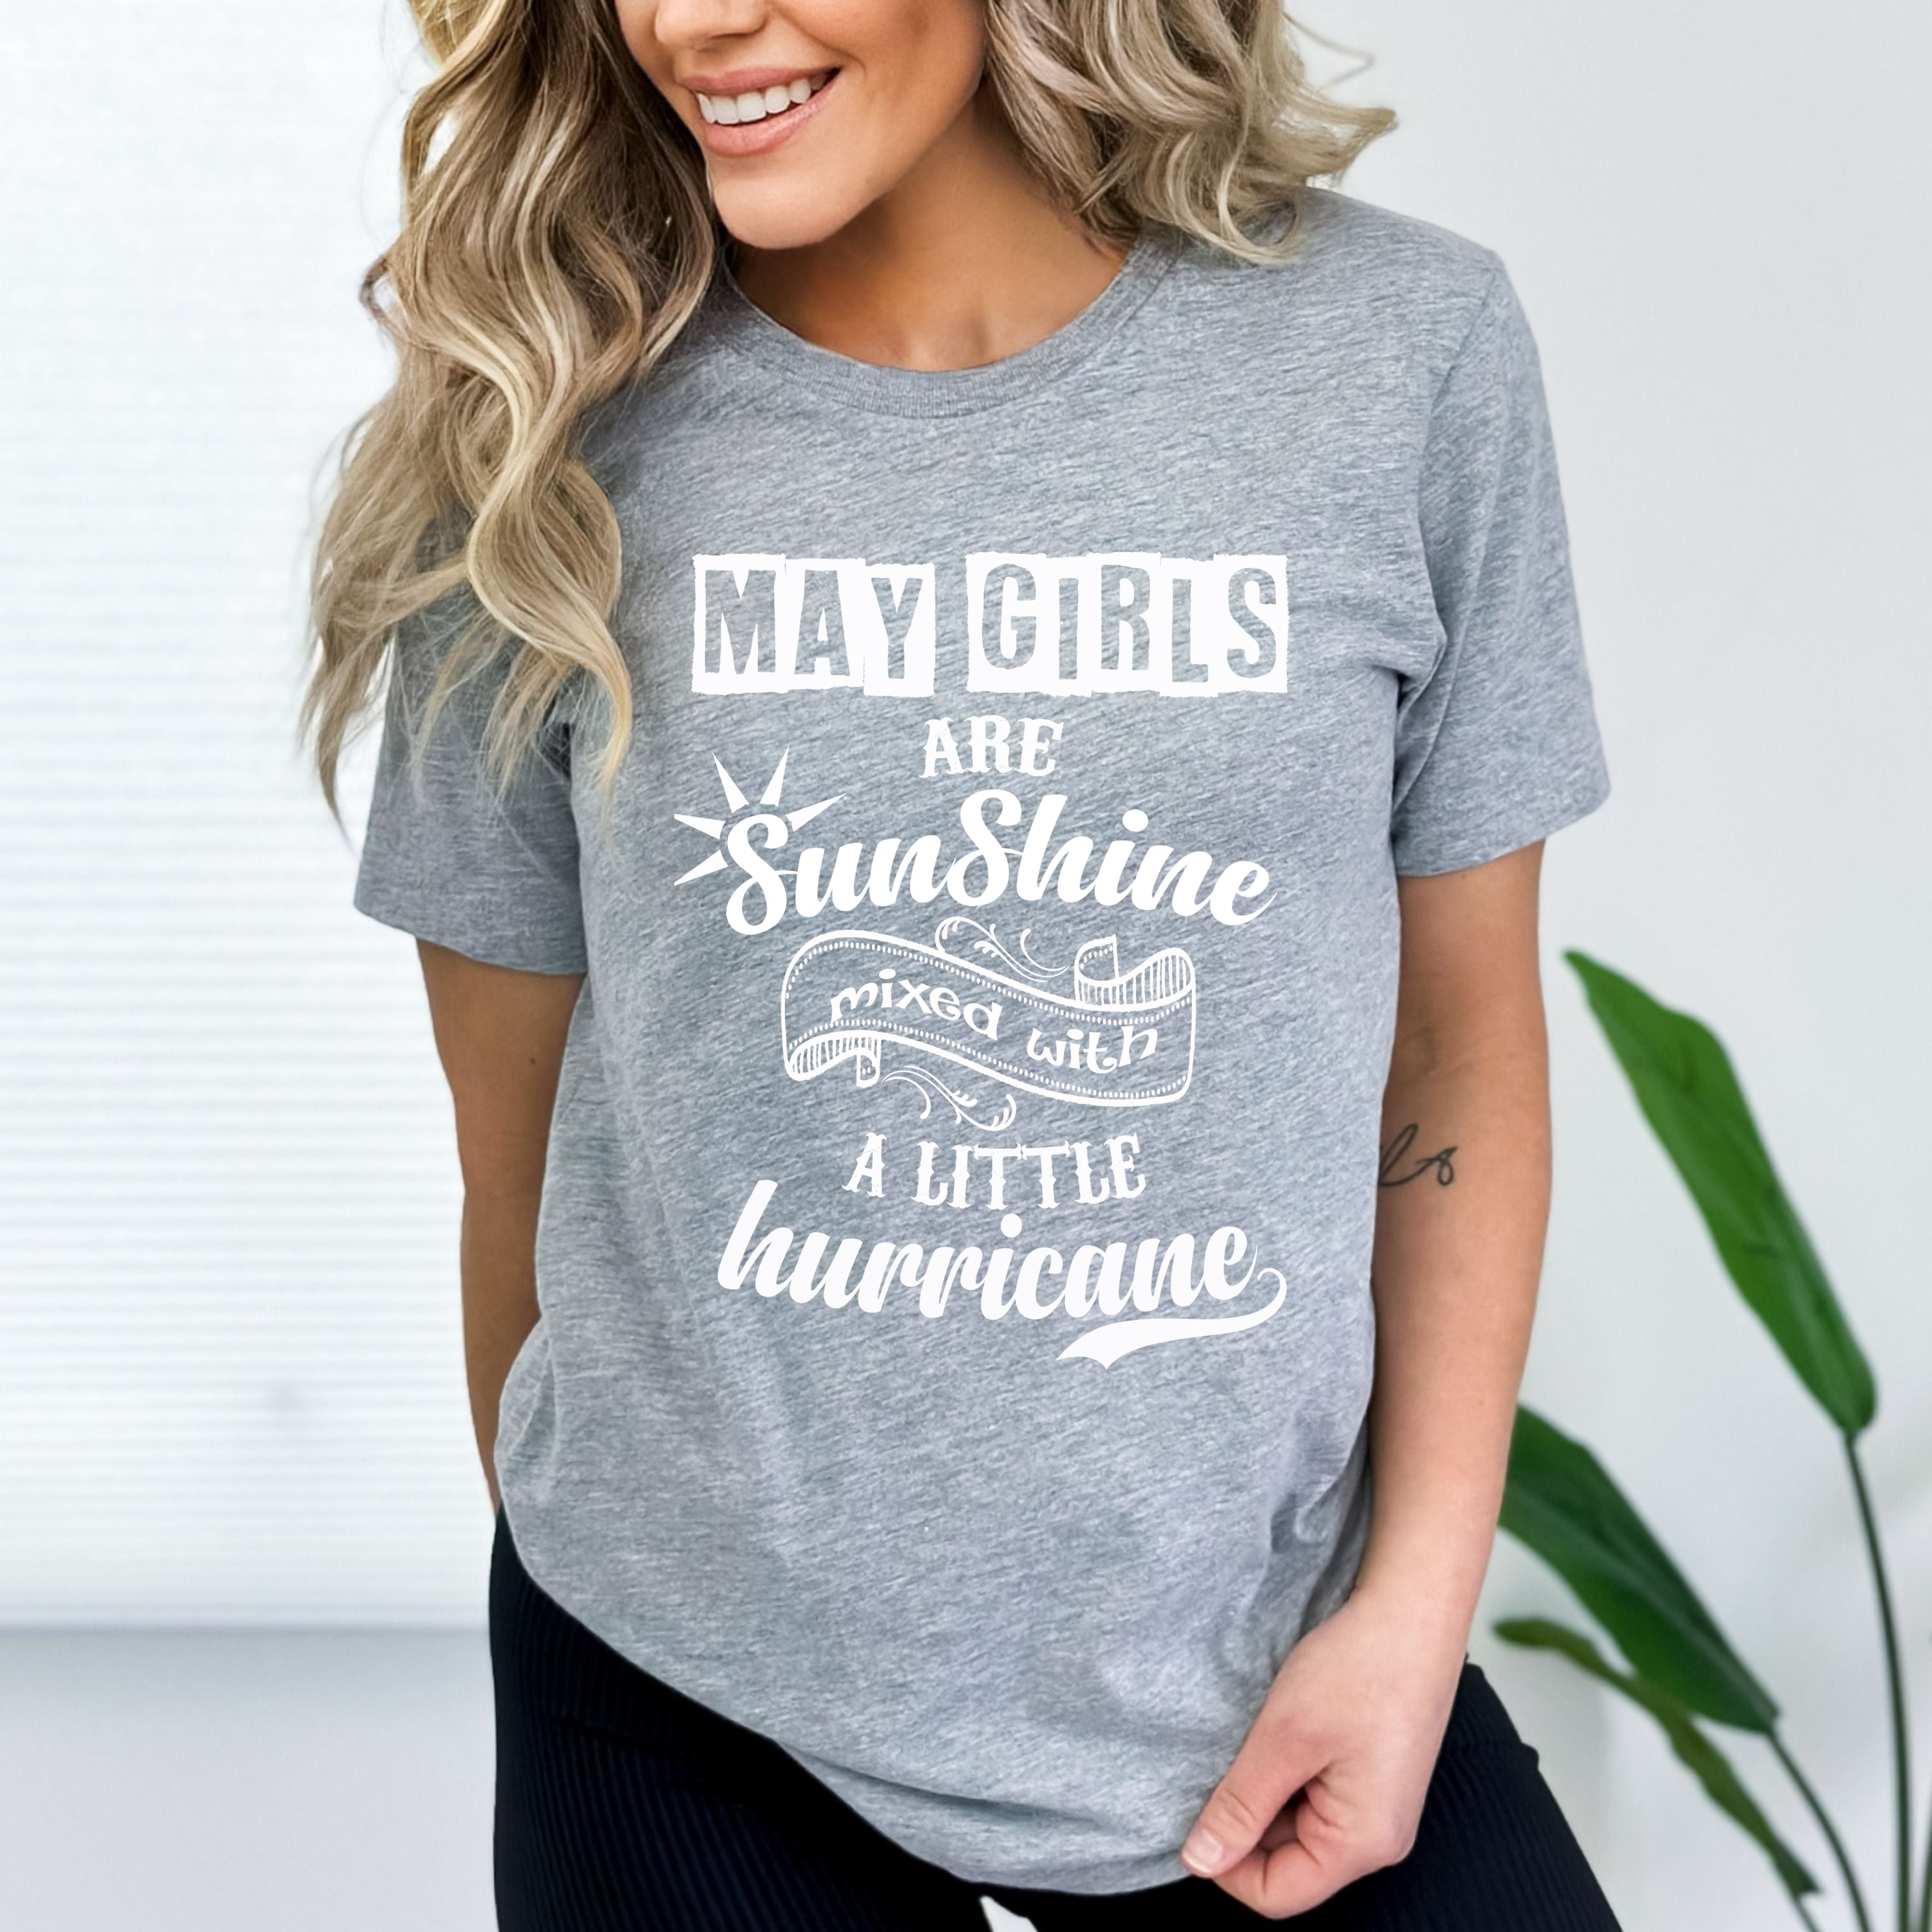 "May Girls Are Sunshine Mixed With Hurricane" Buy All Colors.